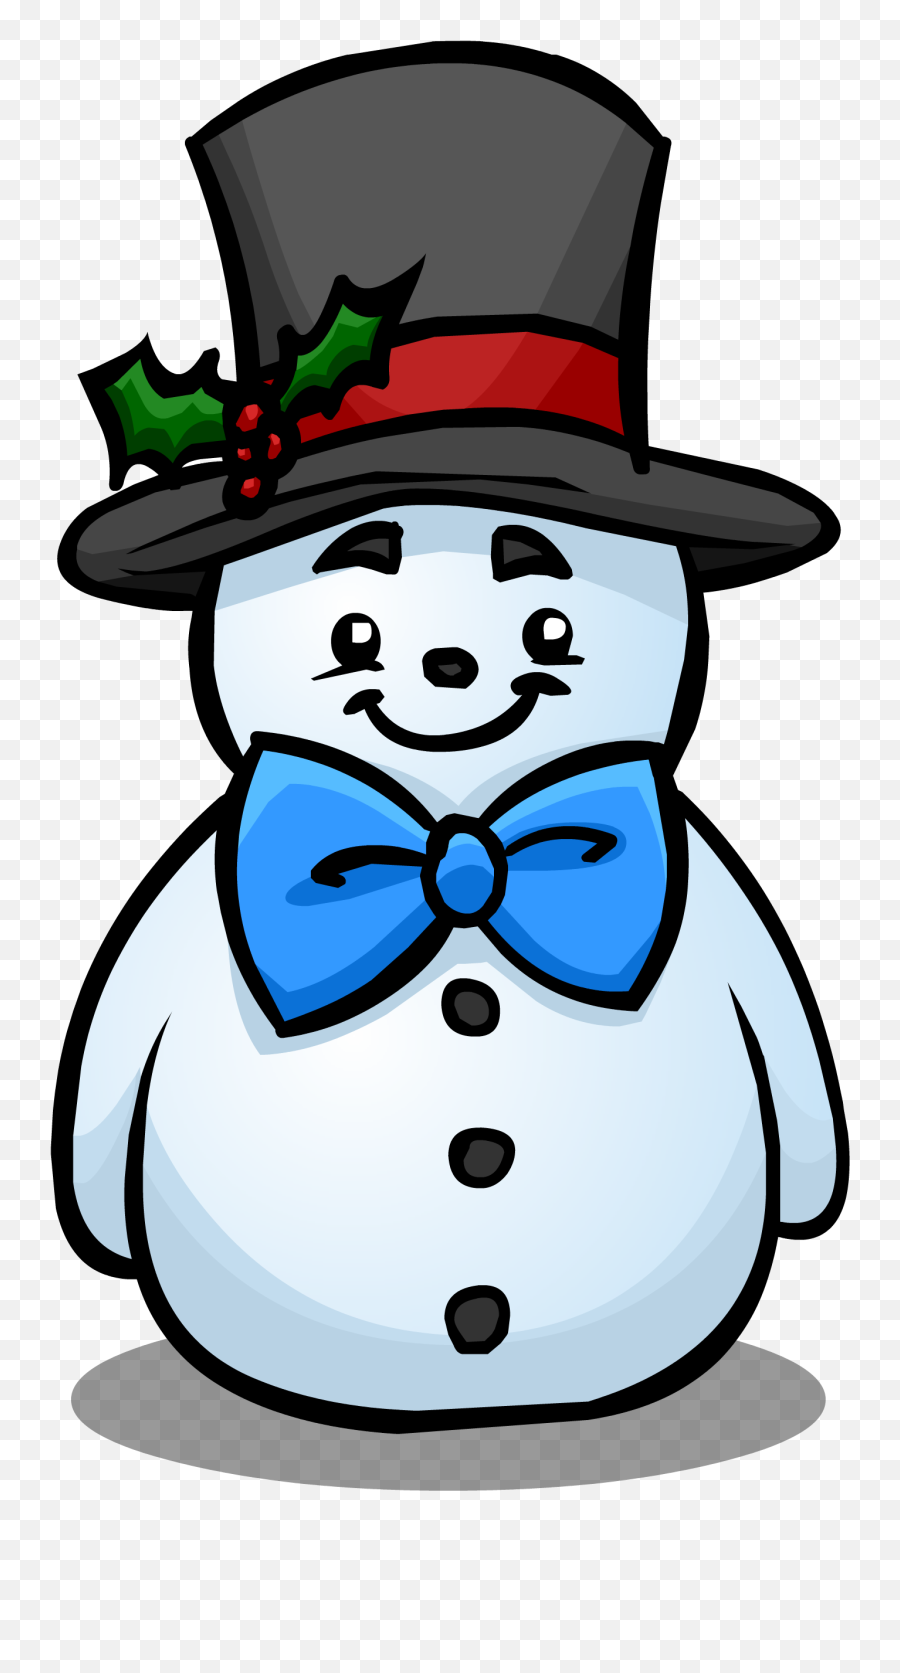 Top Hat Snowman - Snowman With A Top Hat Png,Top Hat Icon